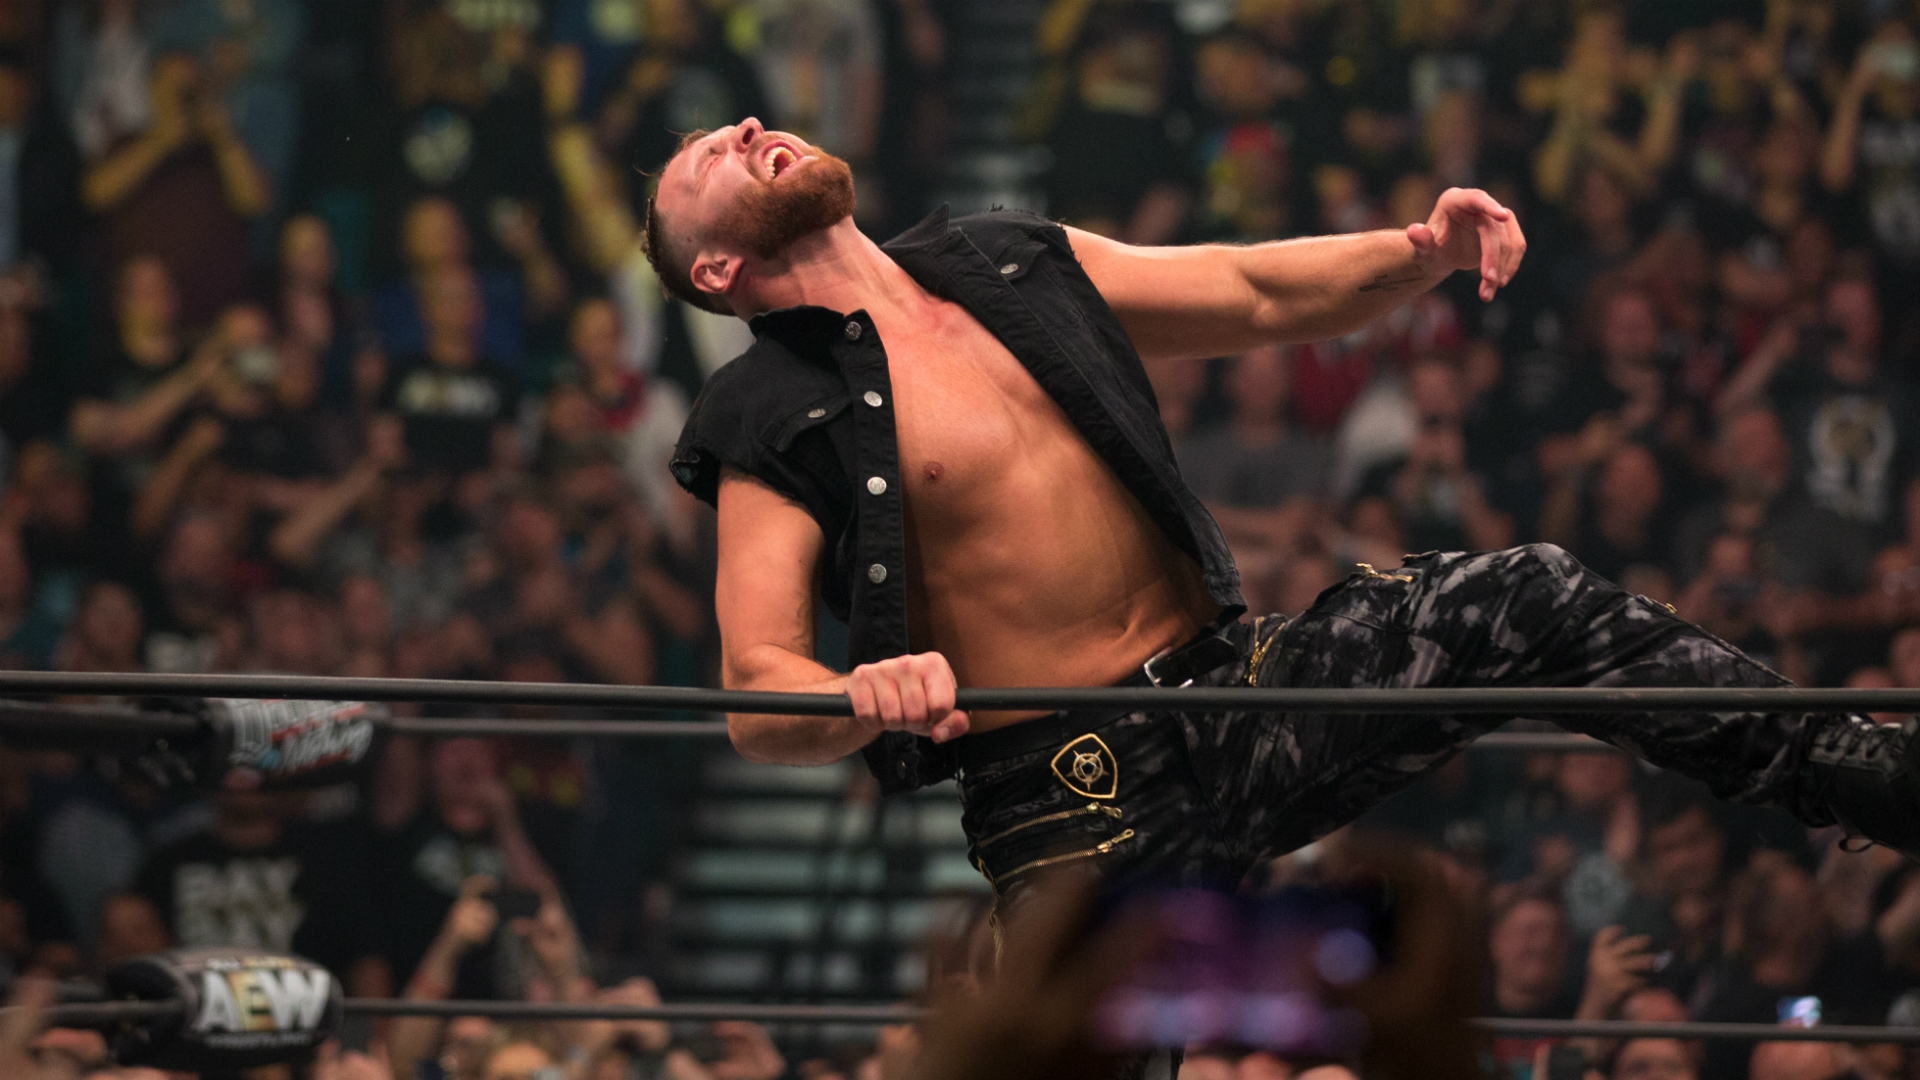 Jon Moxley signs new deal with AEW, Staying Until 2027